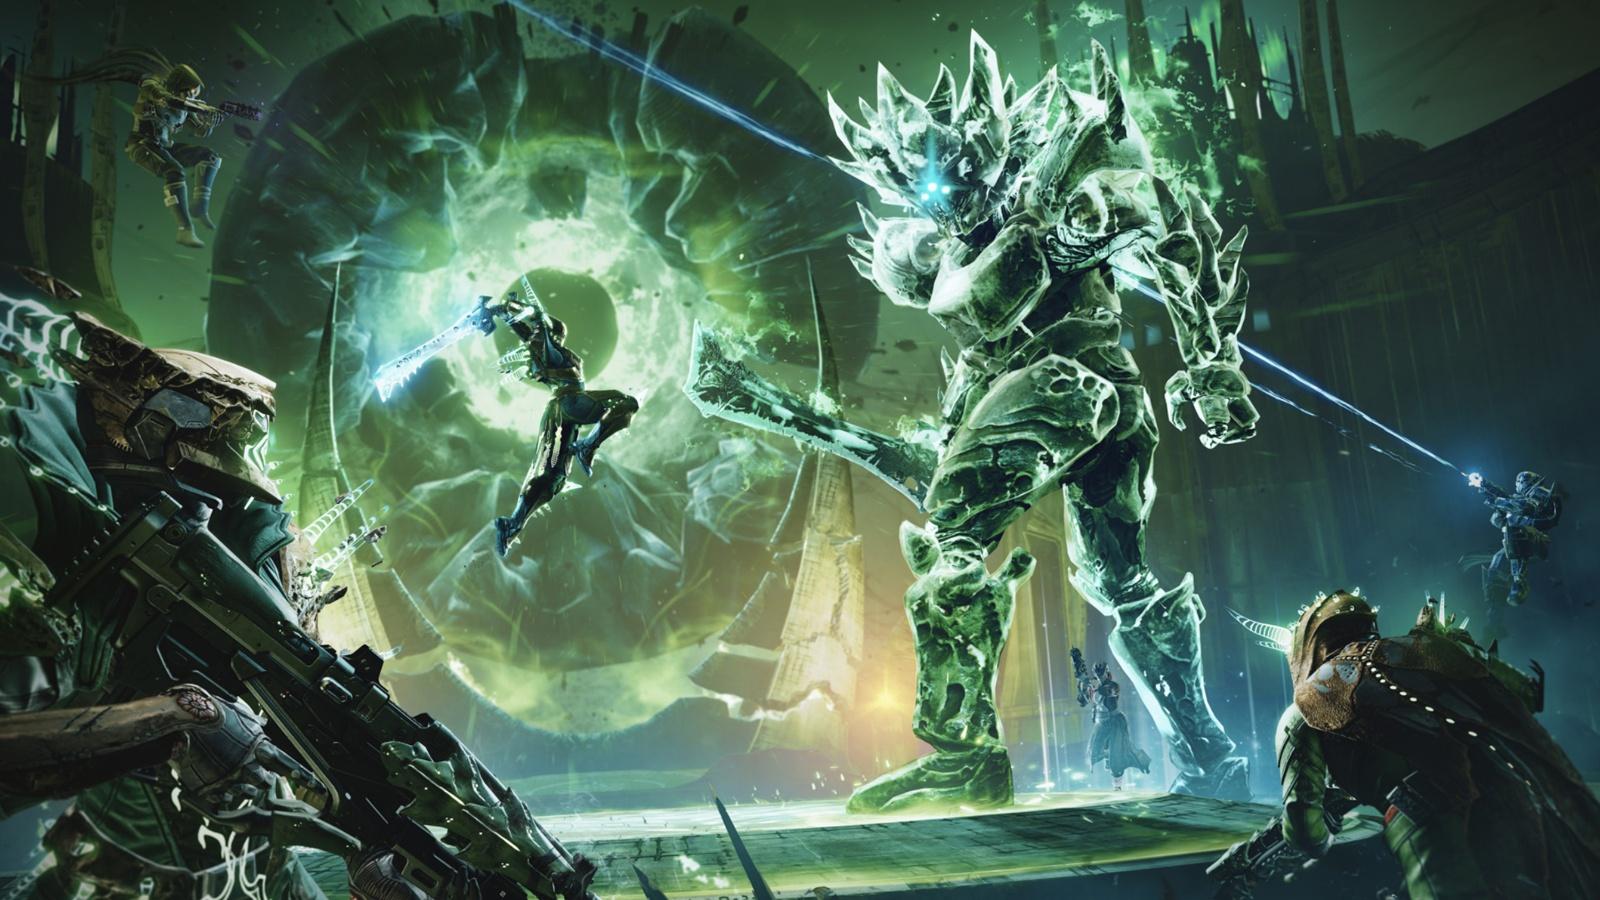 A screenshot from the game Crota's End